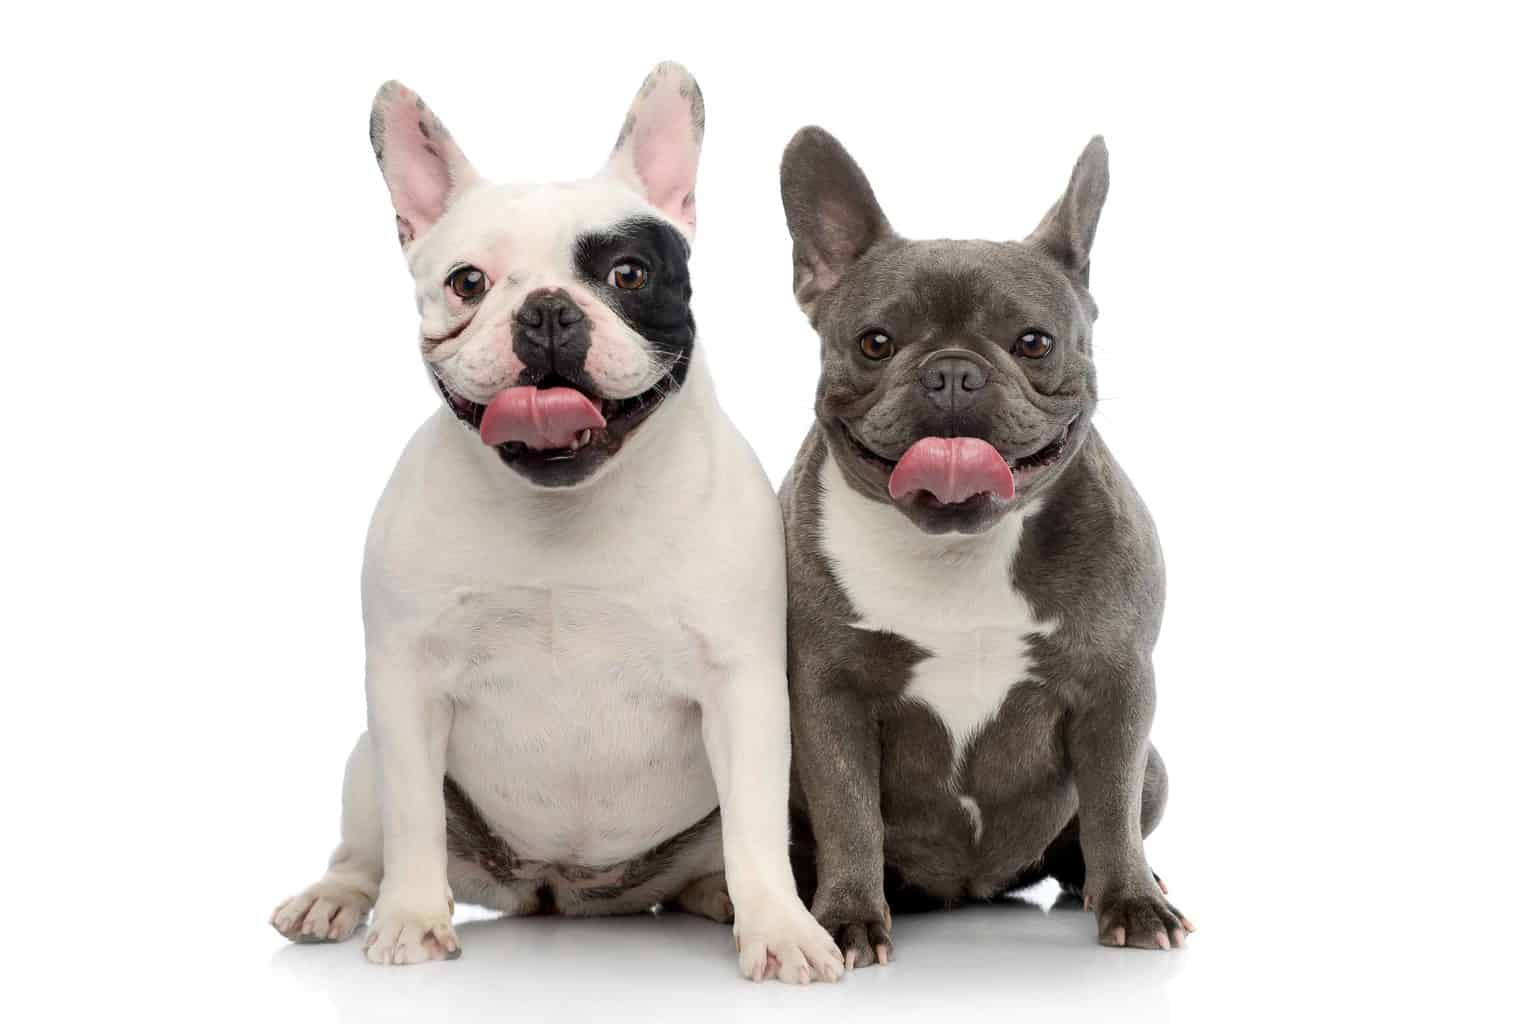 One white French bulldog and one gray French bulldog. To increase your French bulldog’s lifespan, pay attention to diet, provide exercise, visit the vet regularly and spend time with your dog.